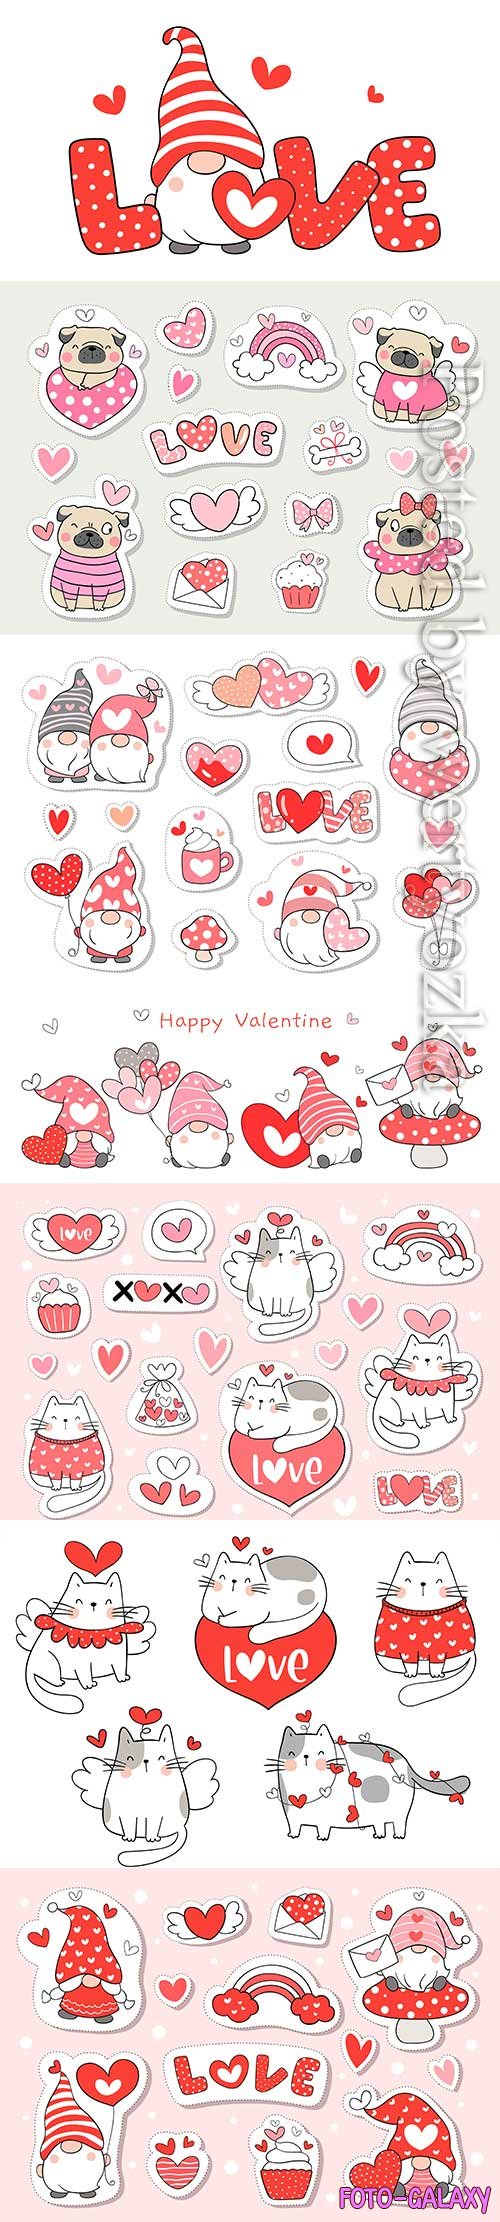 Draw collection stickers sweet for valentine